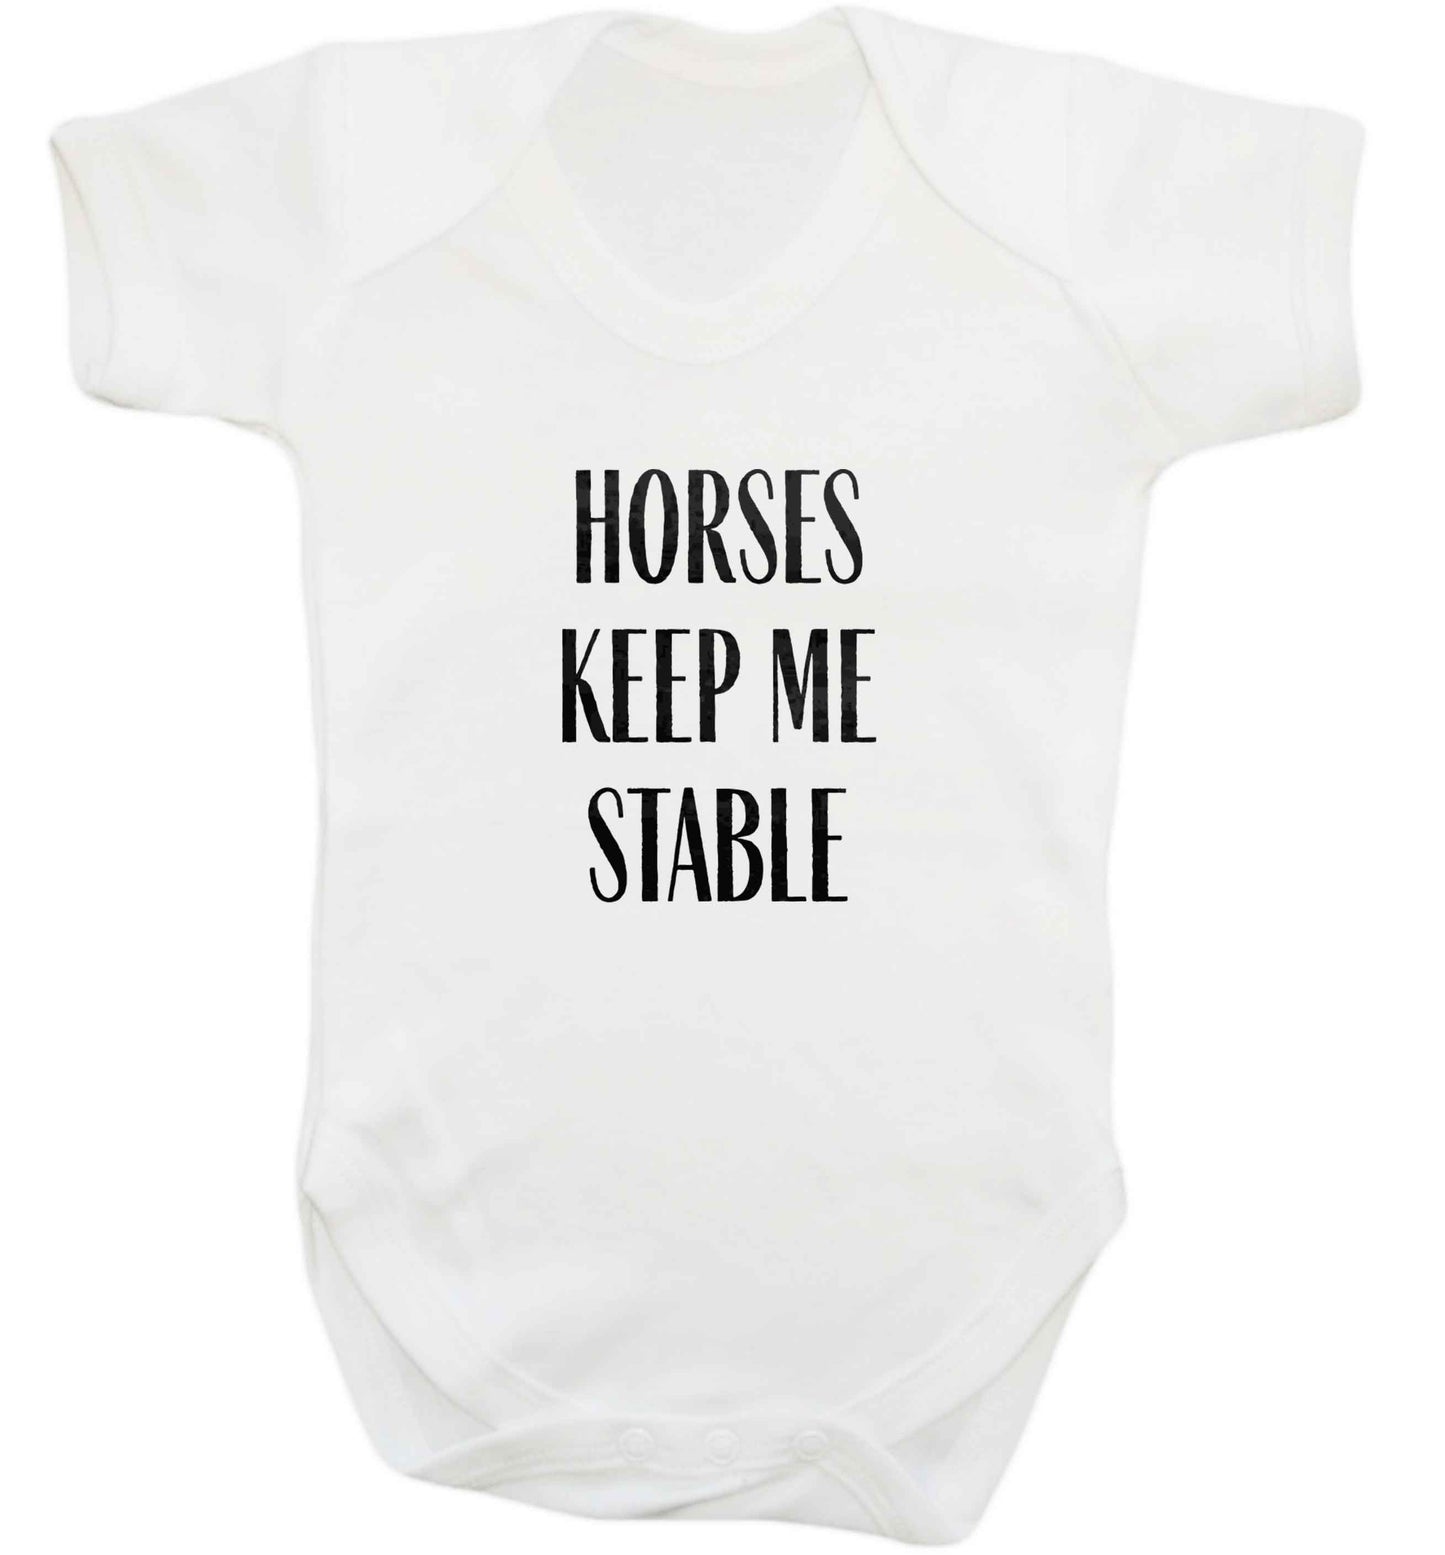 Horses keep me stable baby vest white 18-24 months